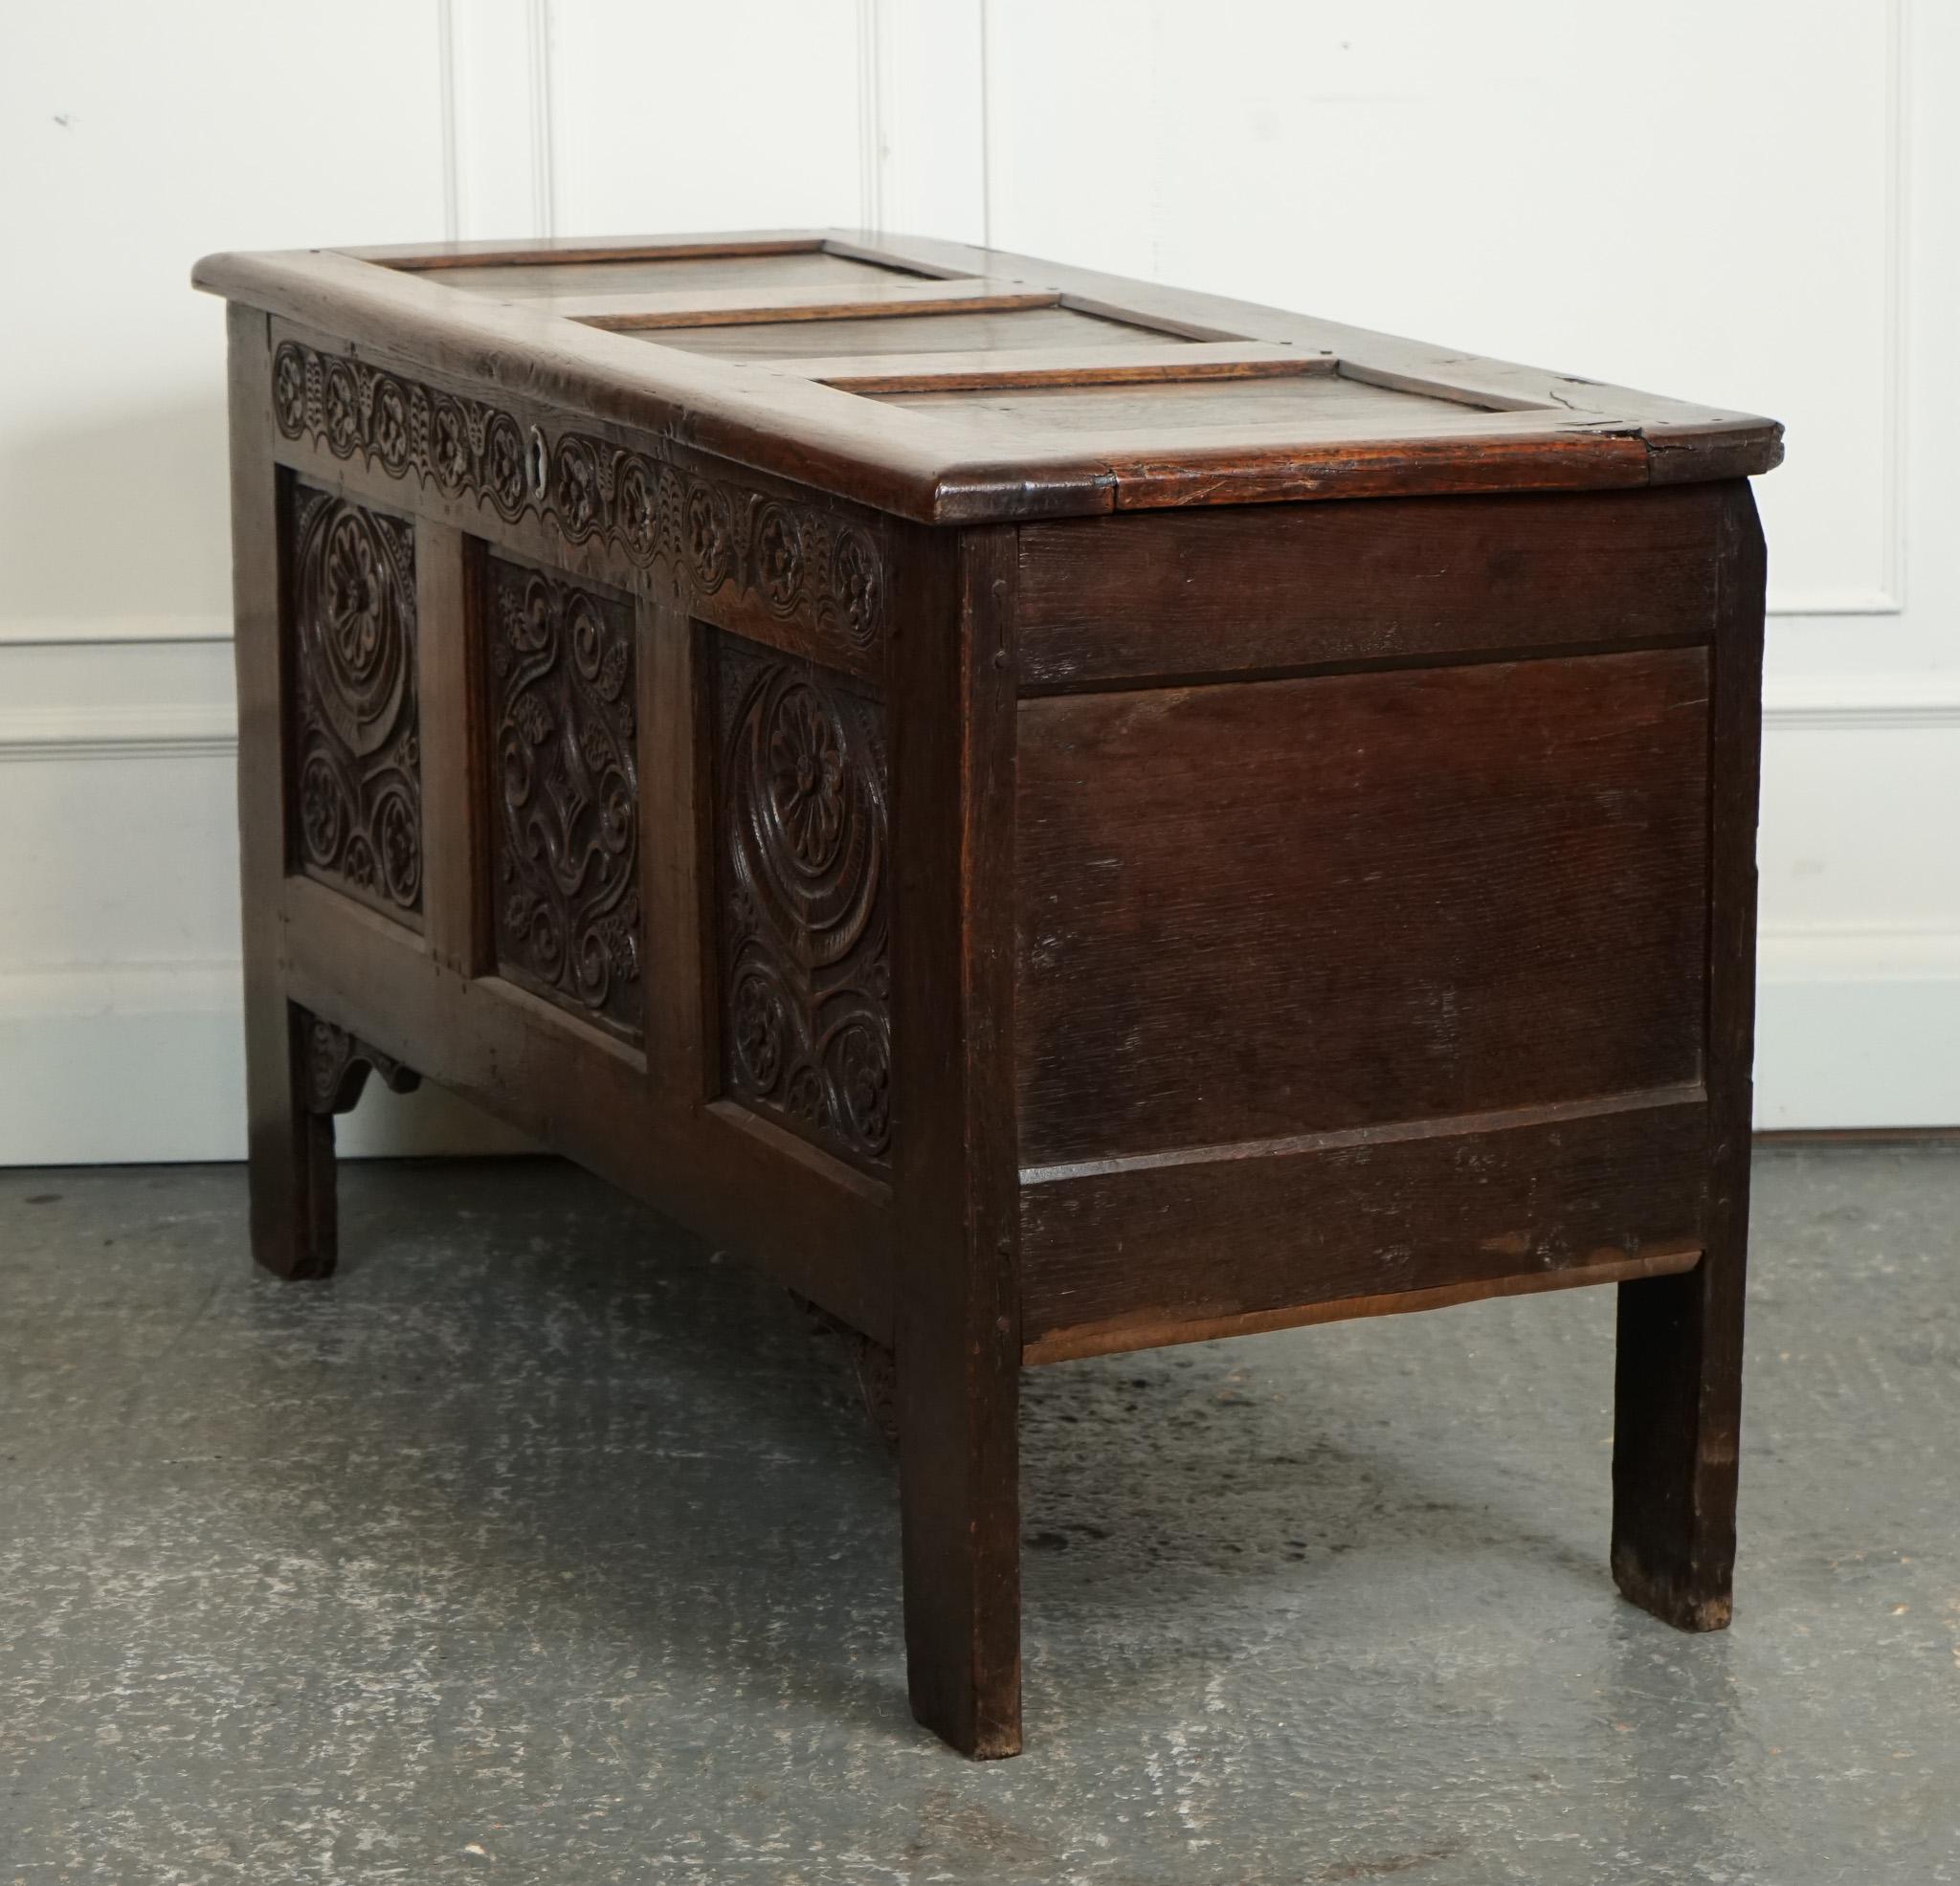 LOVELY 17TH CENTURY CARVED ANTIQUE OAK TRUNK CHEST COFFER j1 For Sale 12